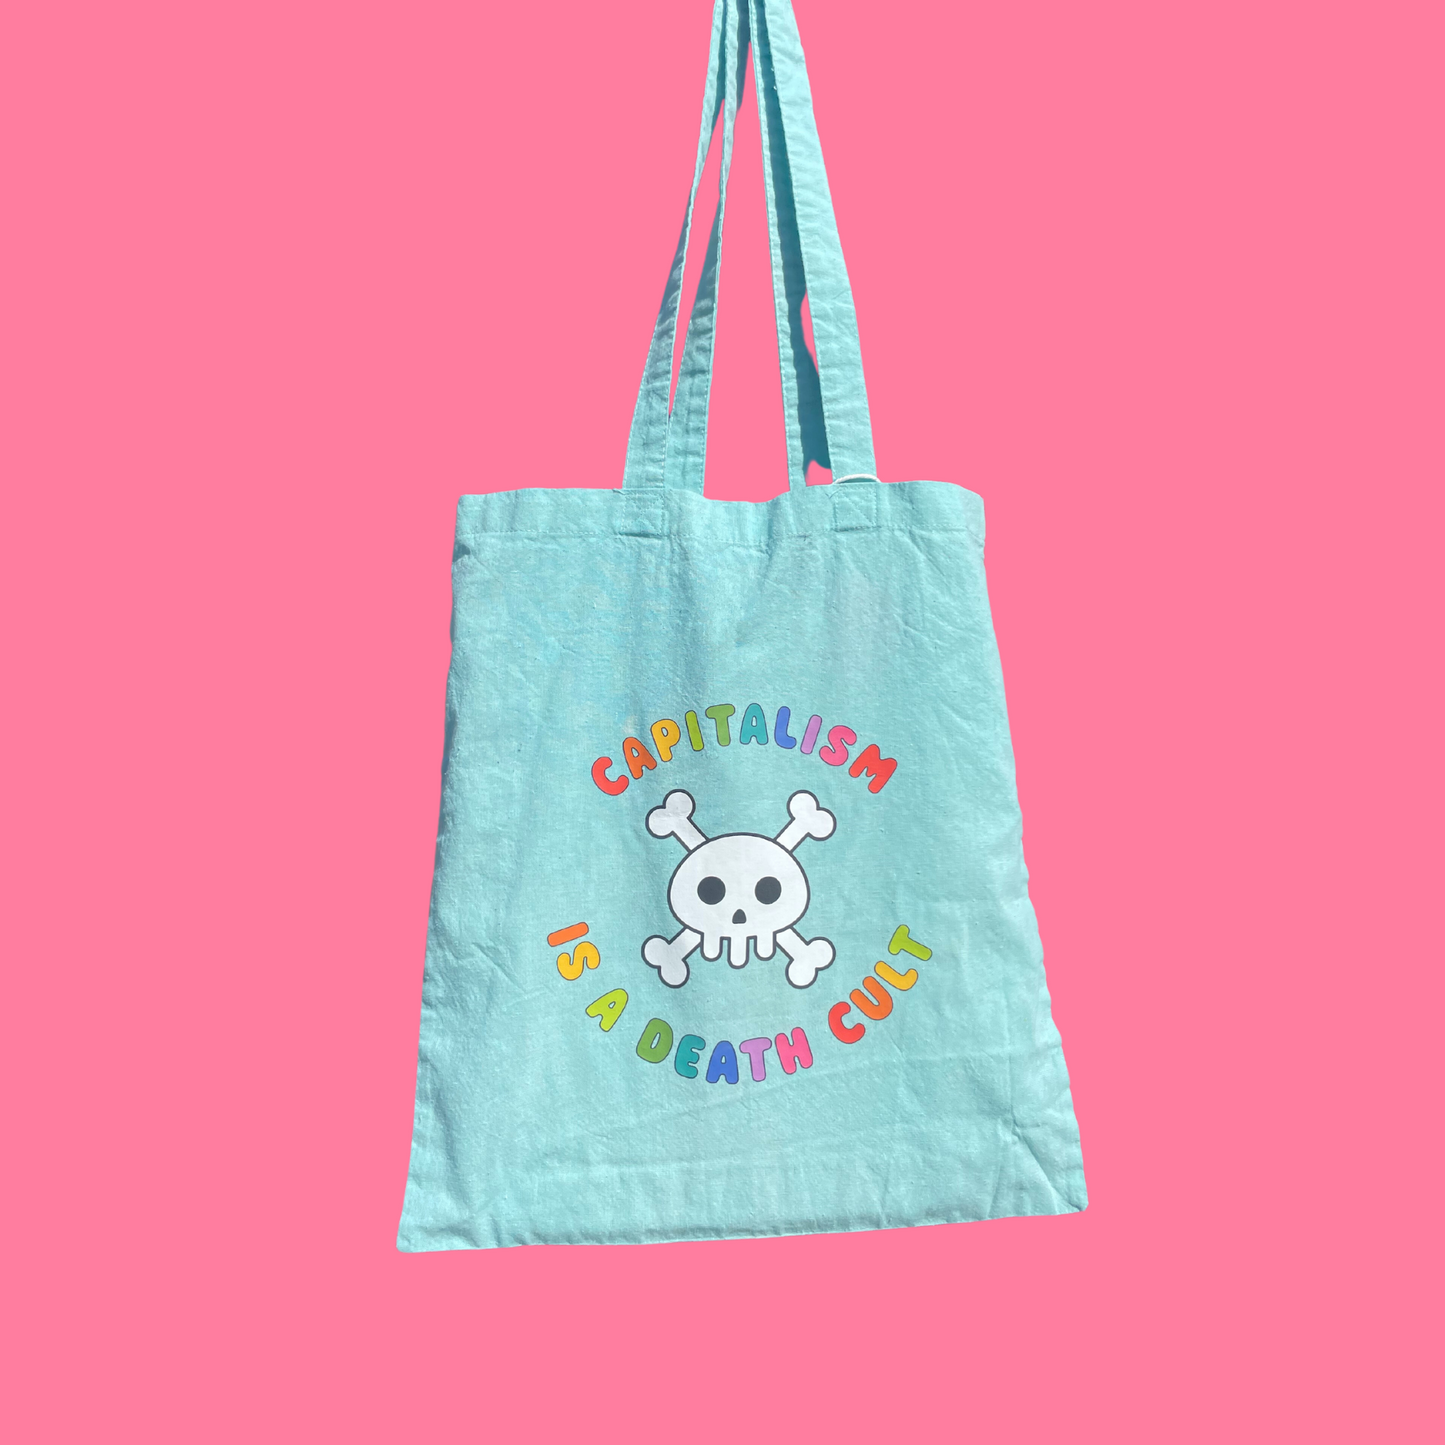 Capitalism Is A Death Cult tote